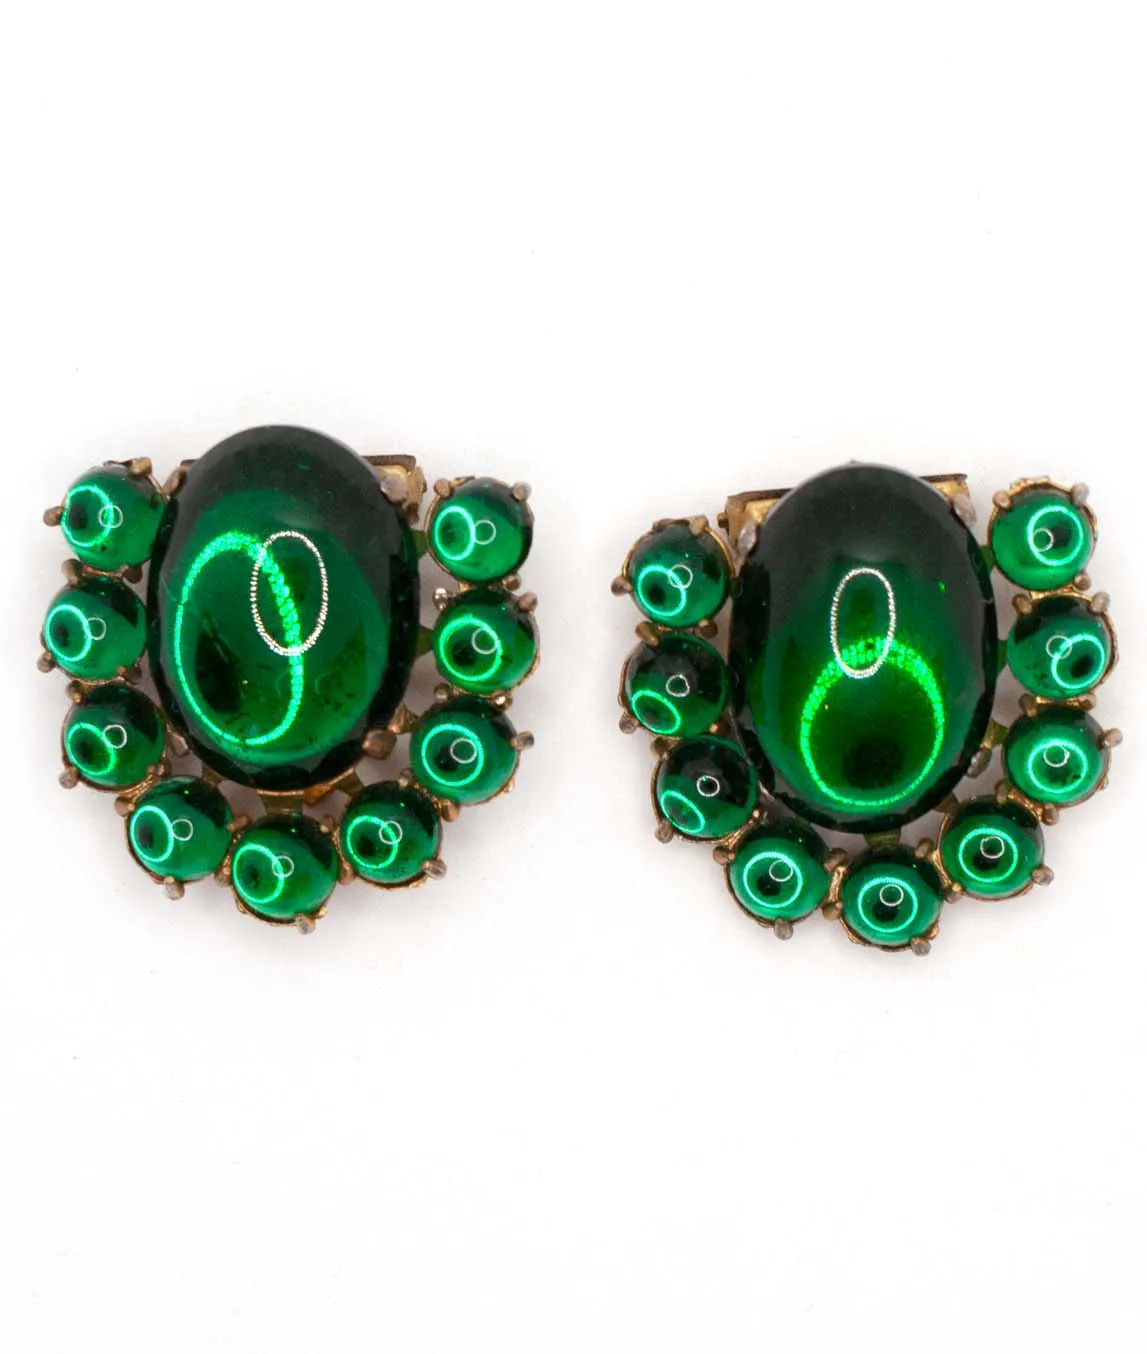 Pair of green glass cabochon dress clips with round glass stones as perimeter - top view